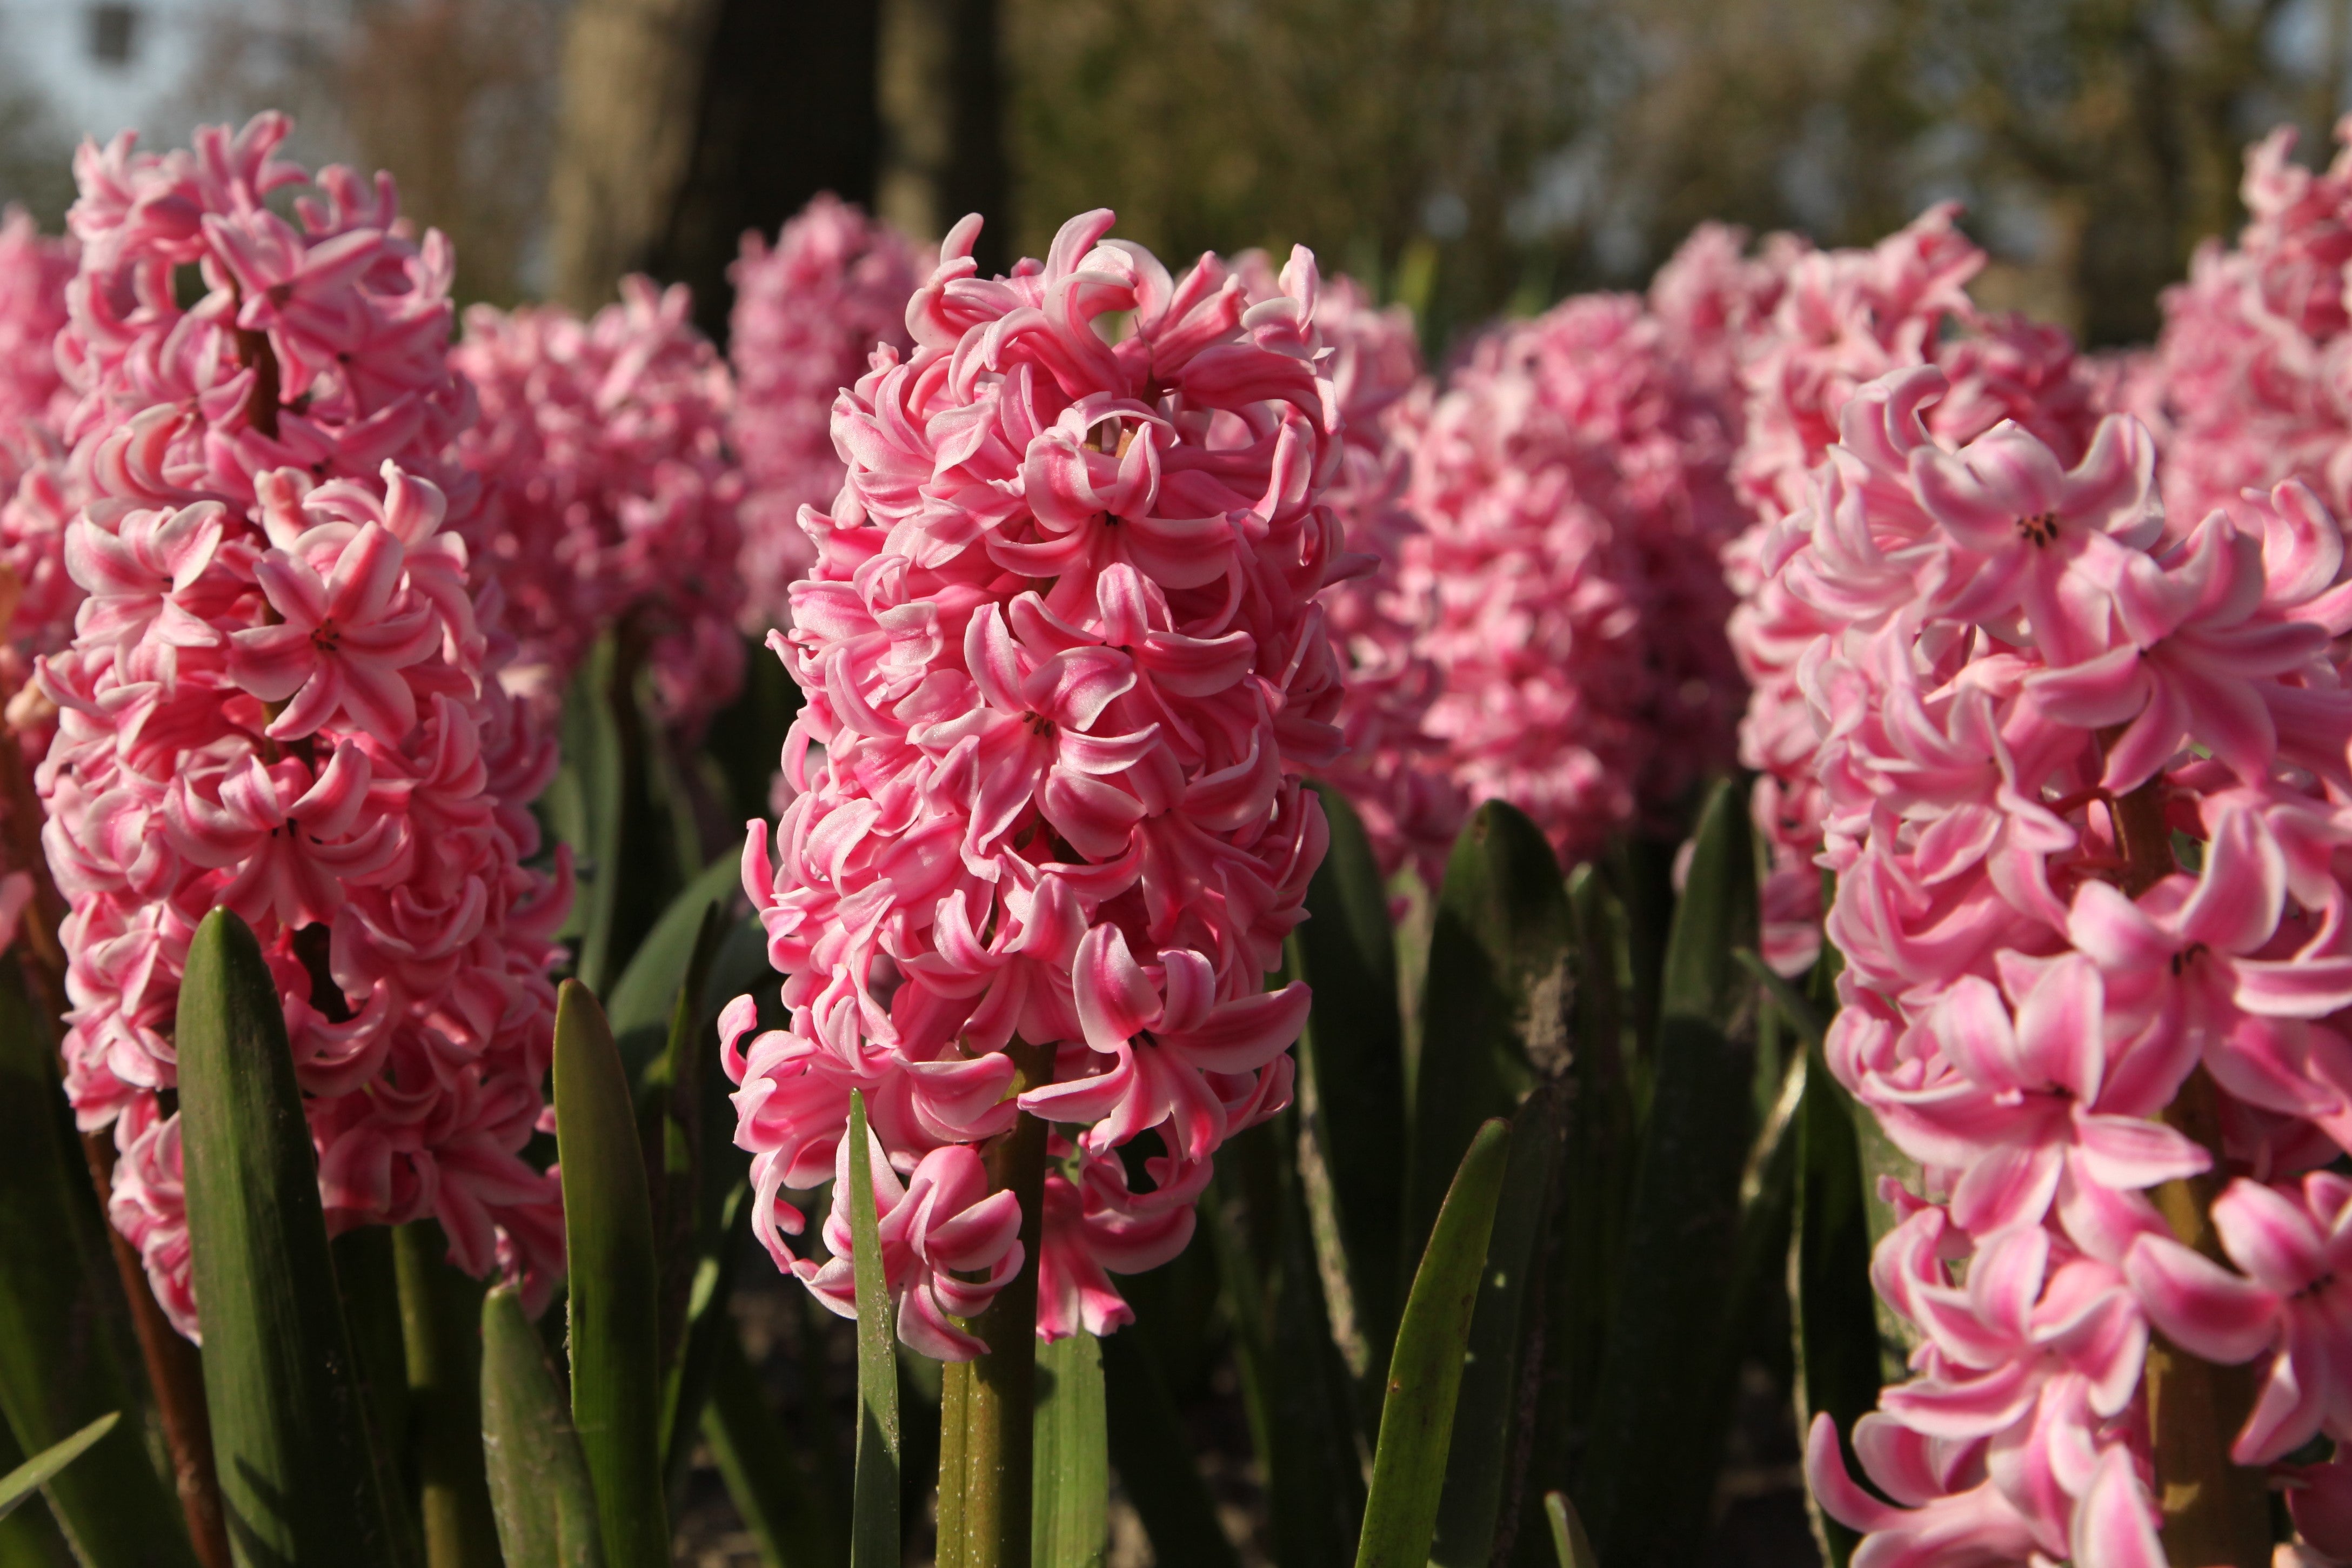 Group of hyacinth fondant, with pink blossoms and green petals